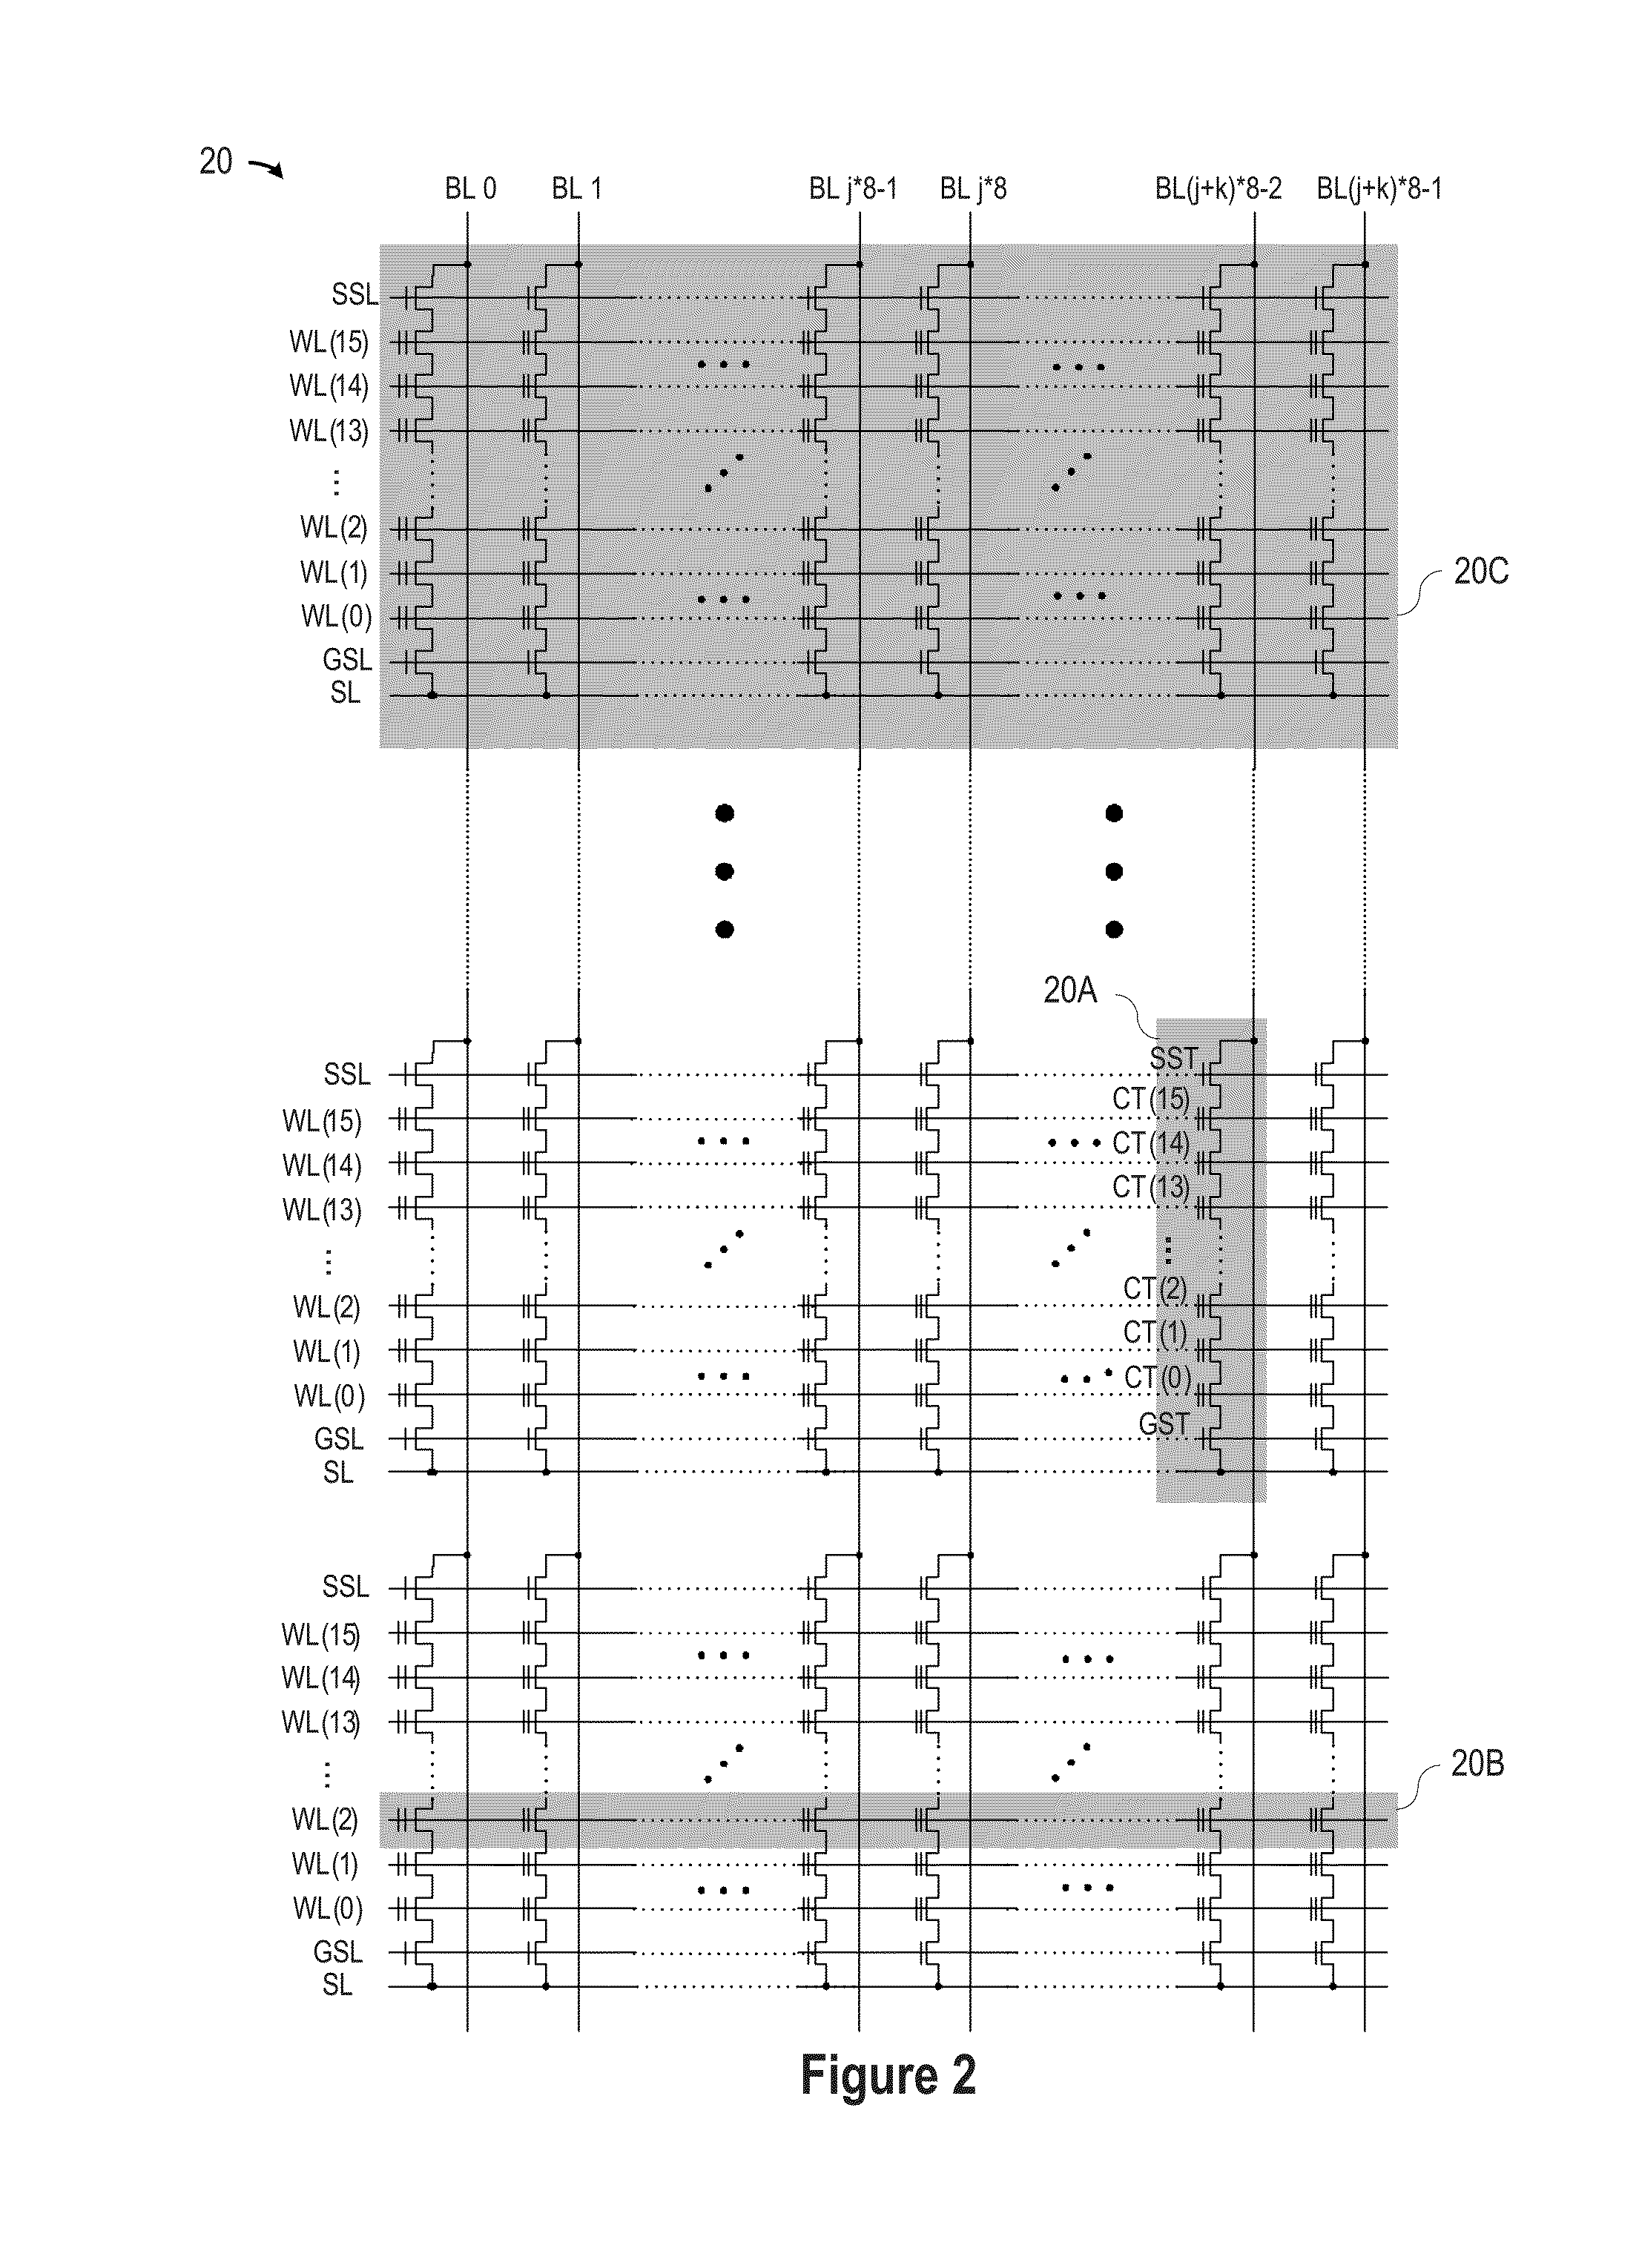 Access Transistor of a Nonvolatile Memory Device and Method for Fabricating Same